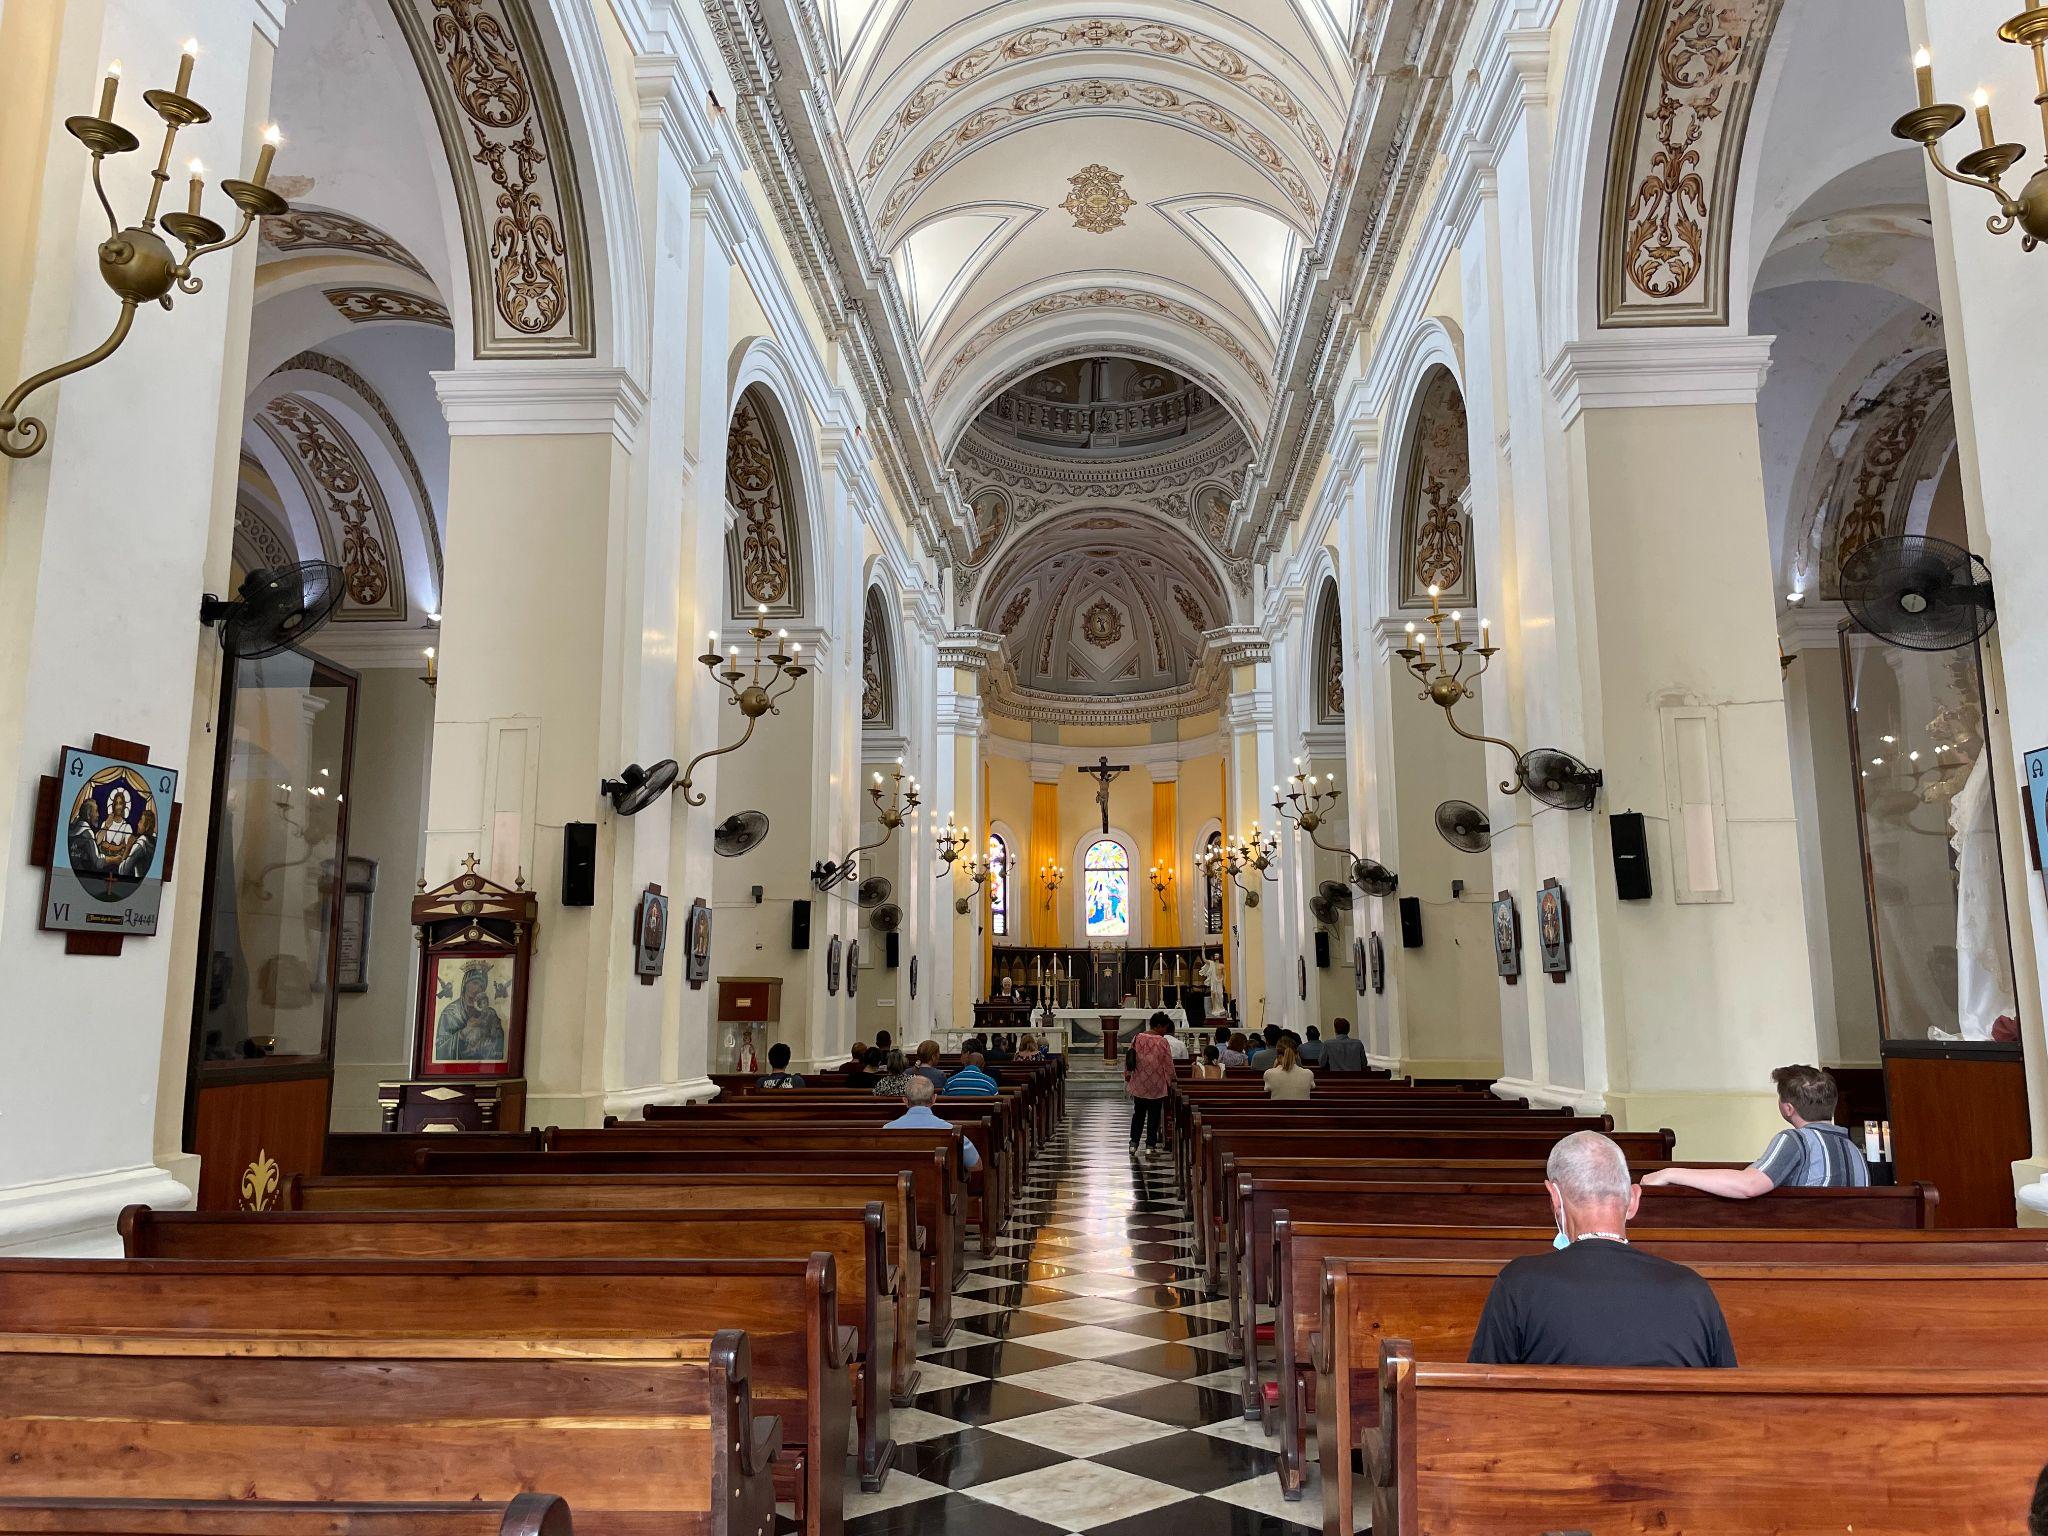 The sanctuary of the Metropolitan Cathedral Basilica of St. John the Baptist in Puerto Rico.